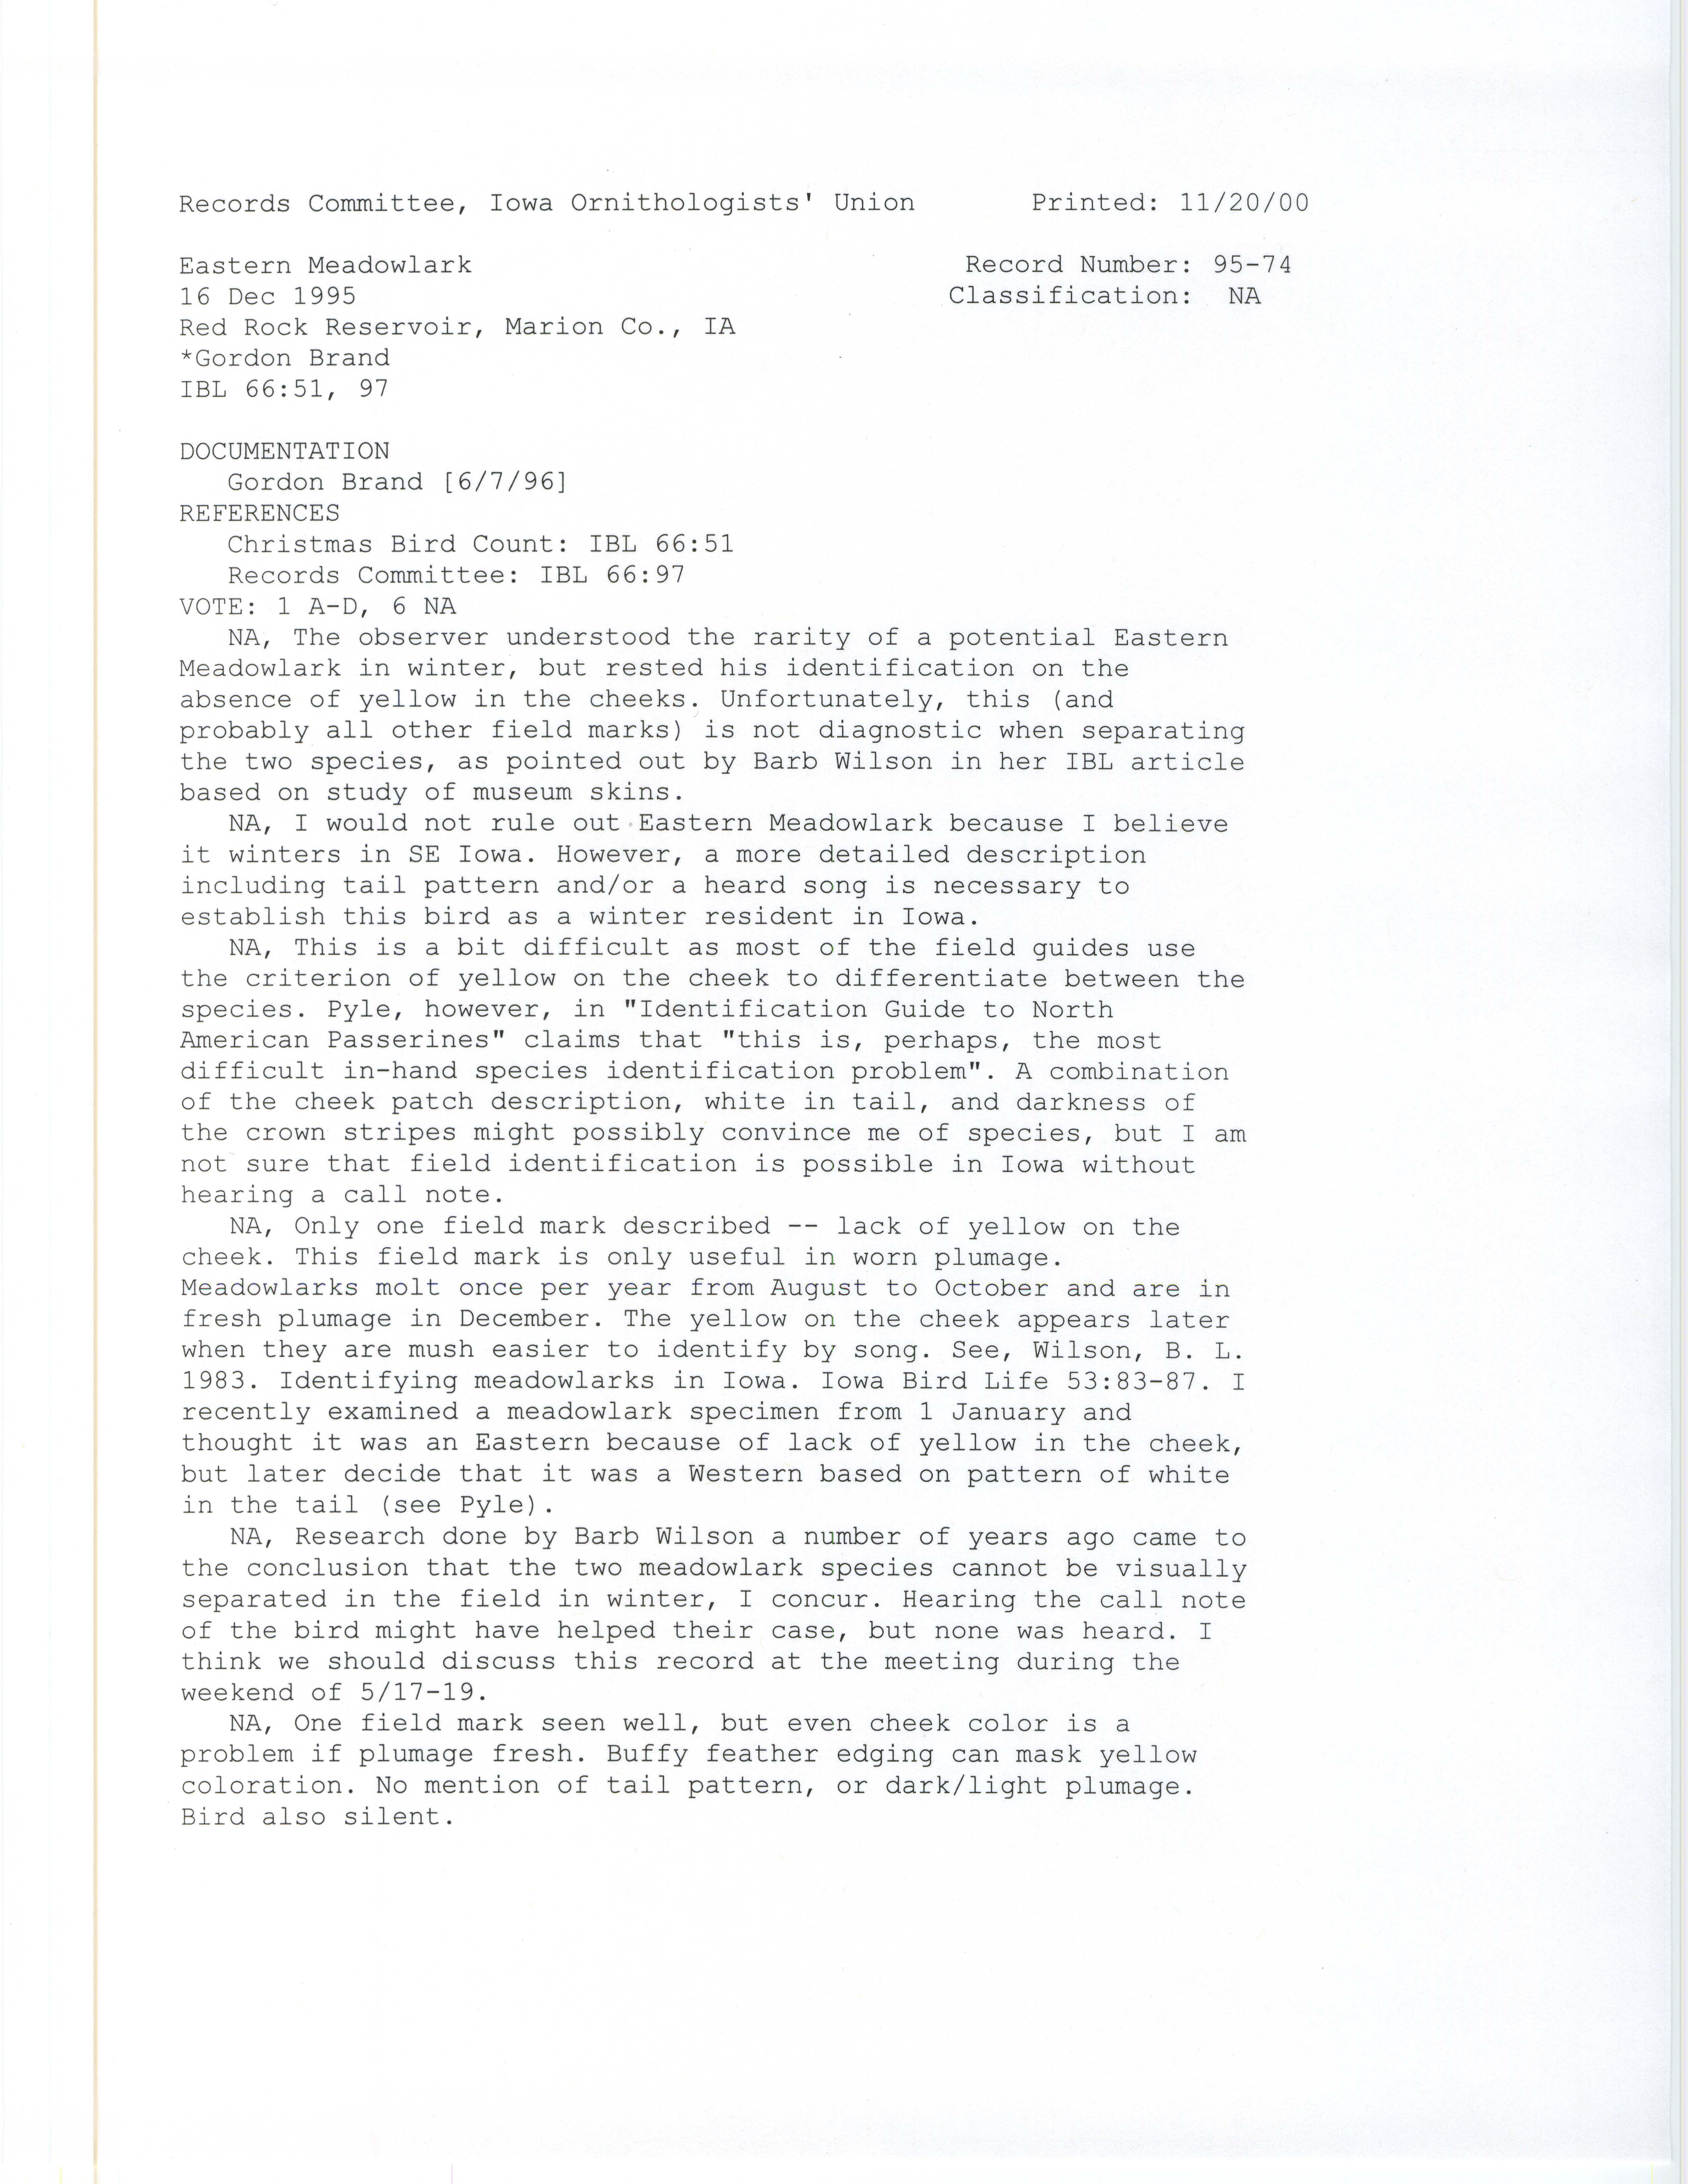 Records Committee review for rare bird sighting for Eastern Meadowlark at Red Rock Reservoir, 1995